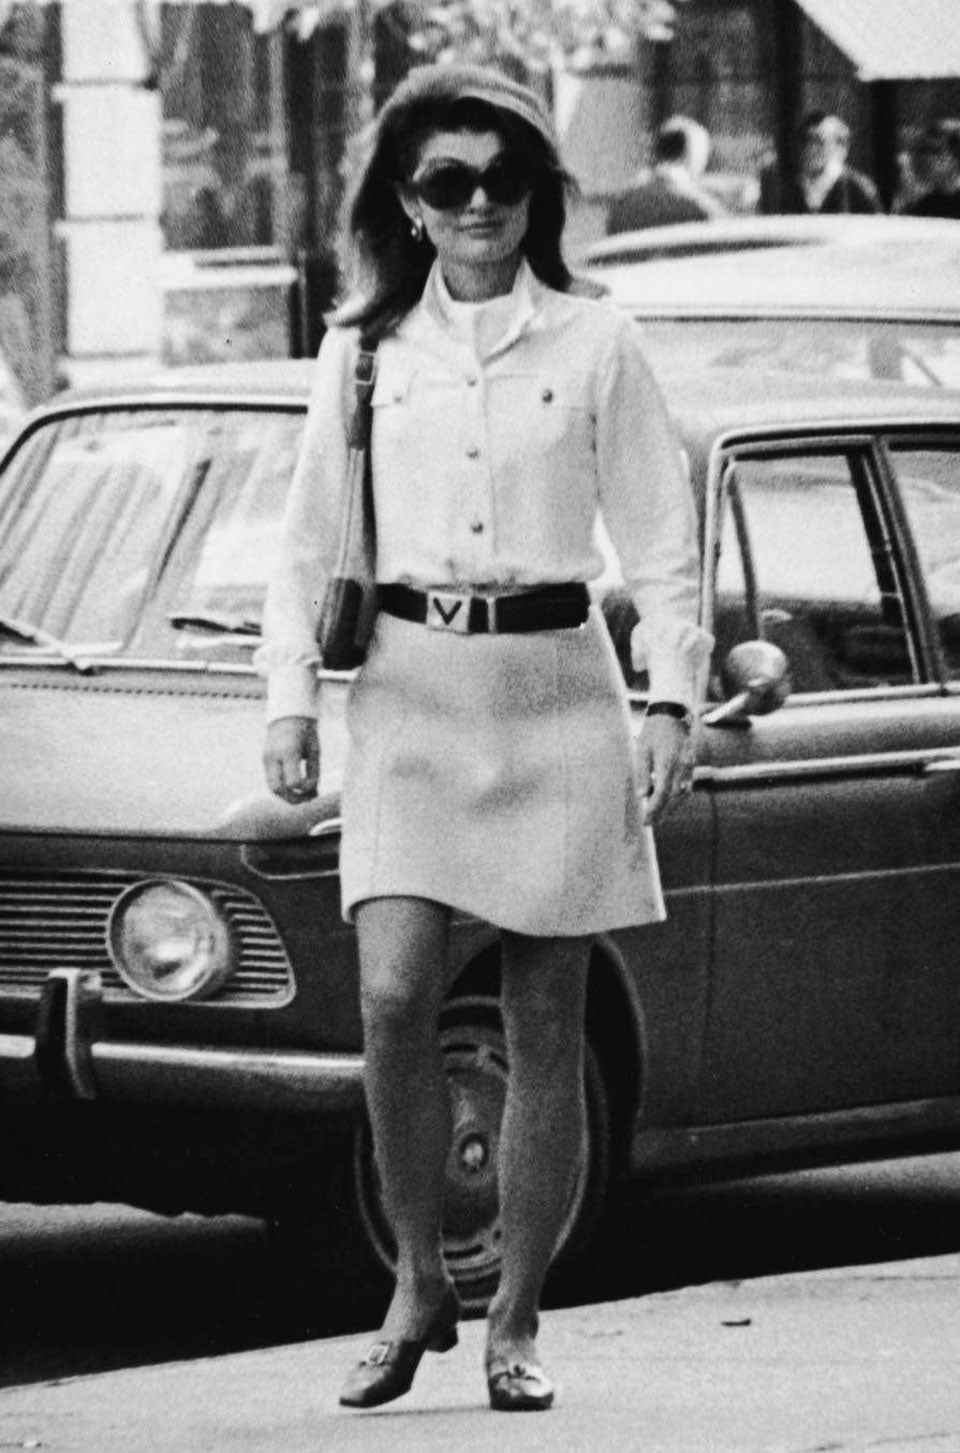 Jackie O in street wearing oversized sunglasses and short skirt